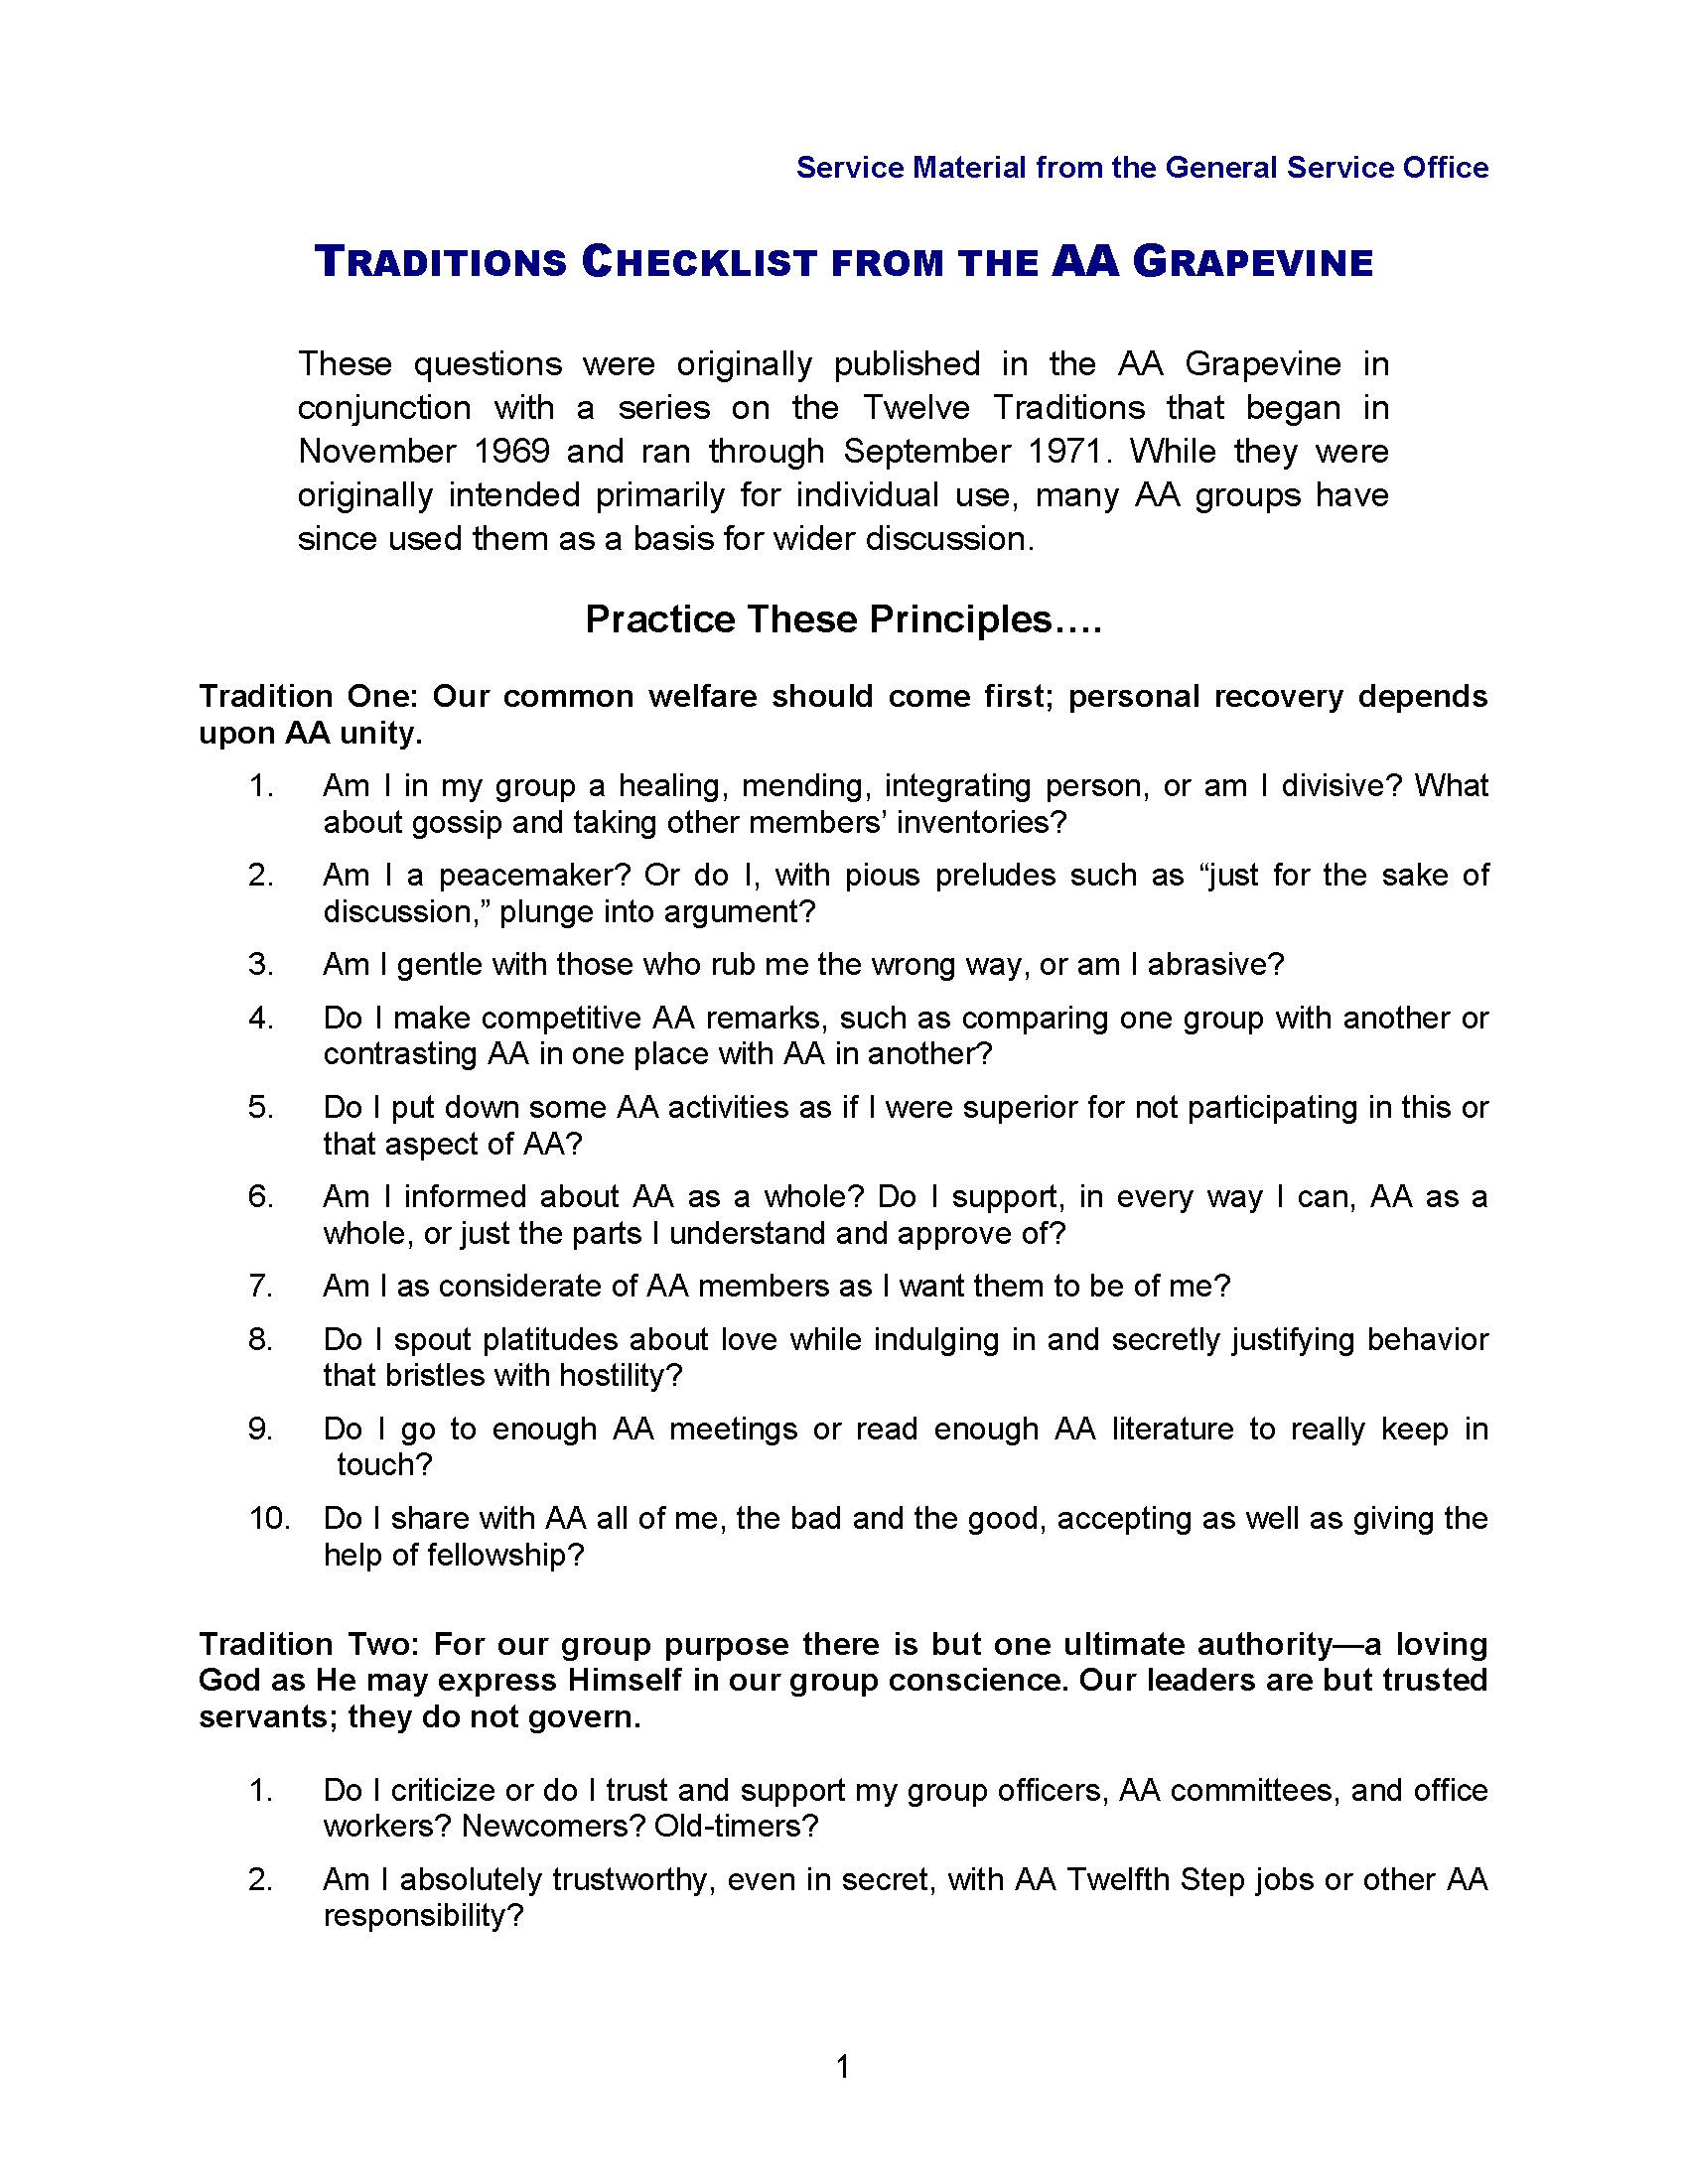 Traditions Checklist From The A A Grapevine Alcoholics Anonymous